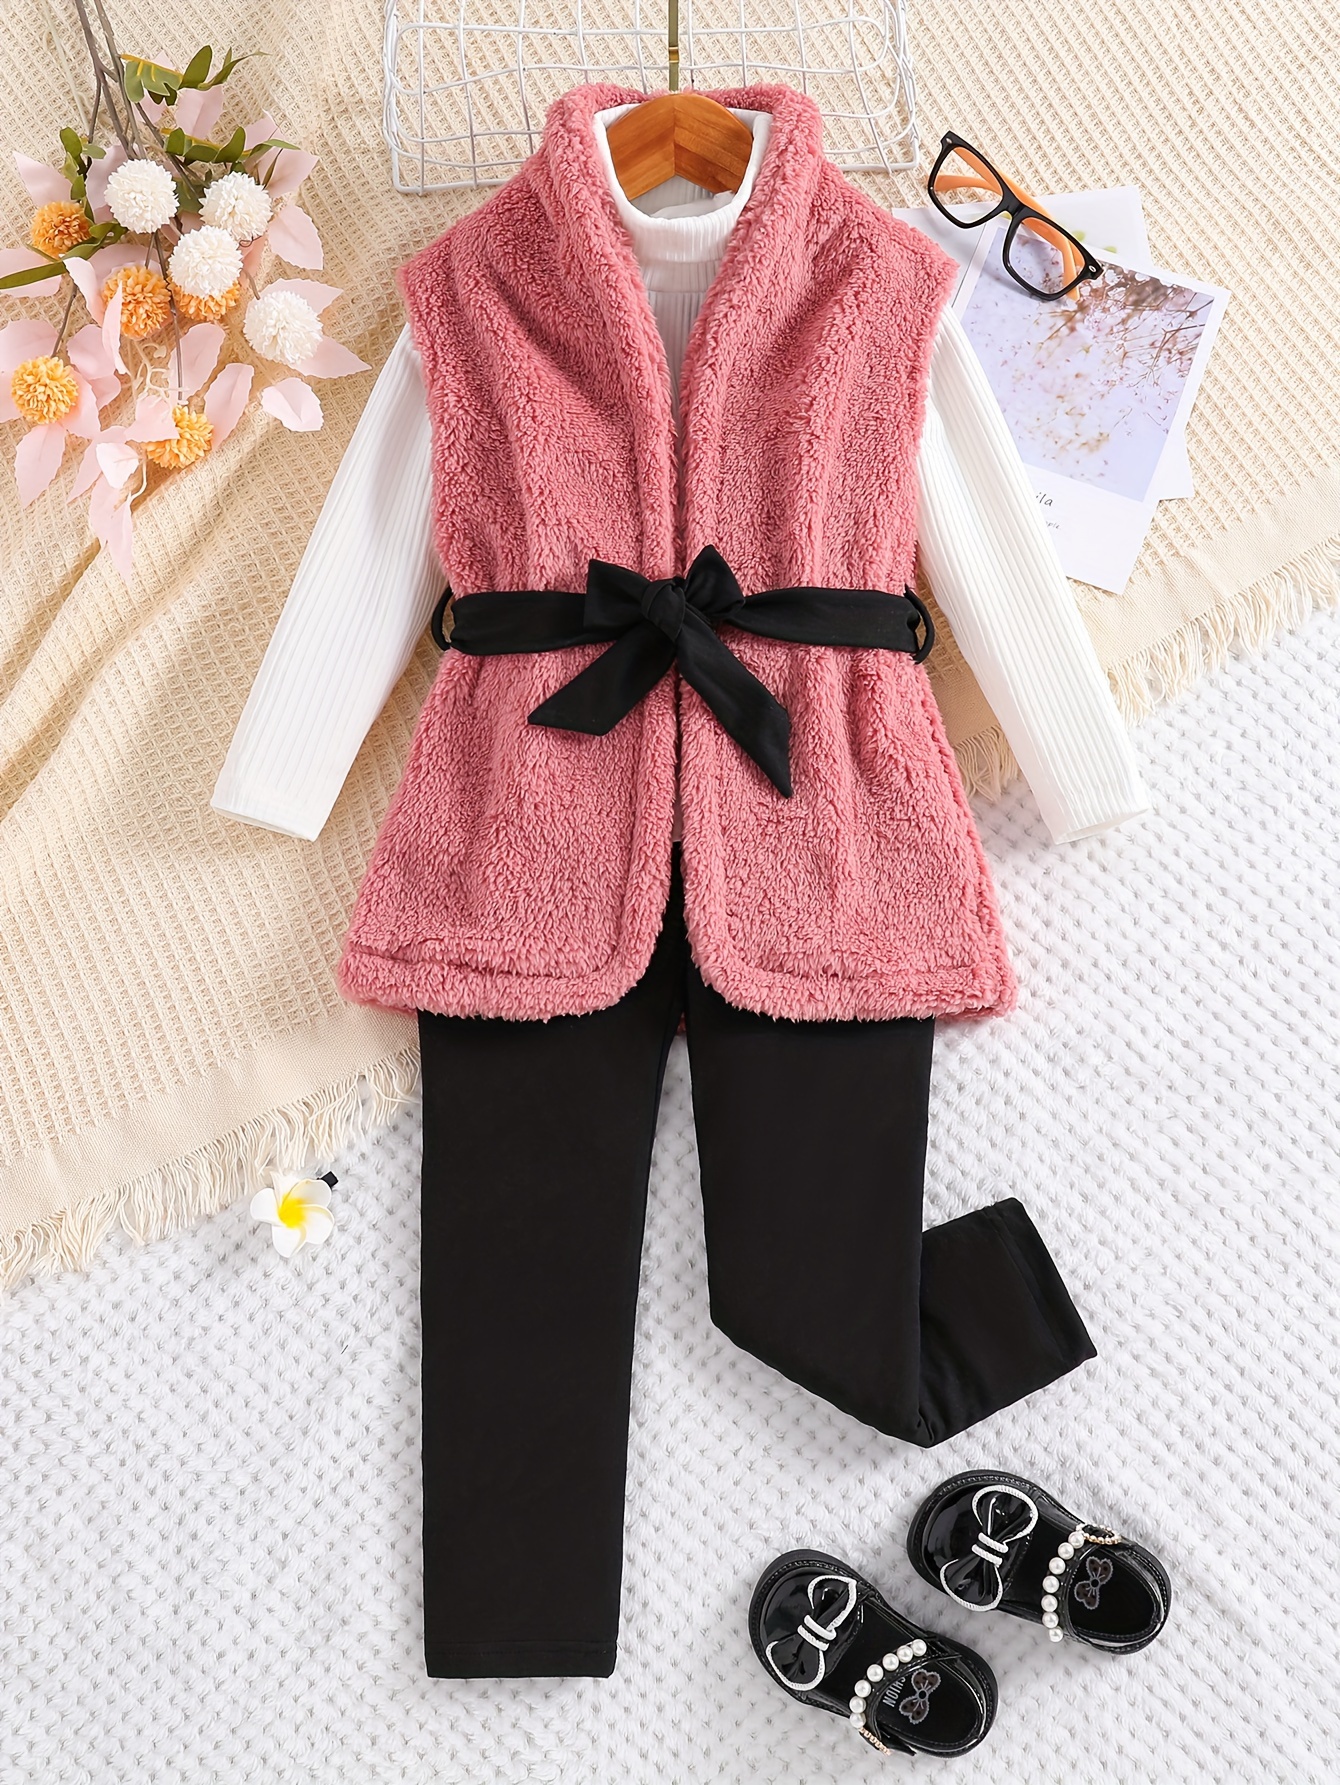 Winter Clothes Teen Teens Two Piece Toddler Girls Sleeveless Floral Printed  Vest Tops Bowknot Skirts Outfits Baby Long Pant 